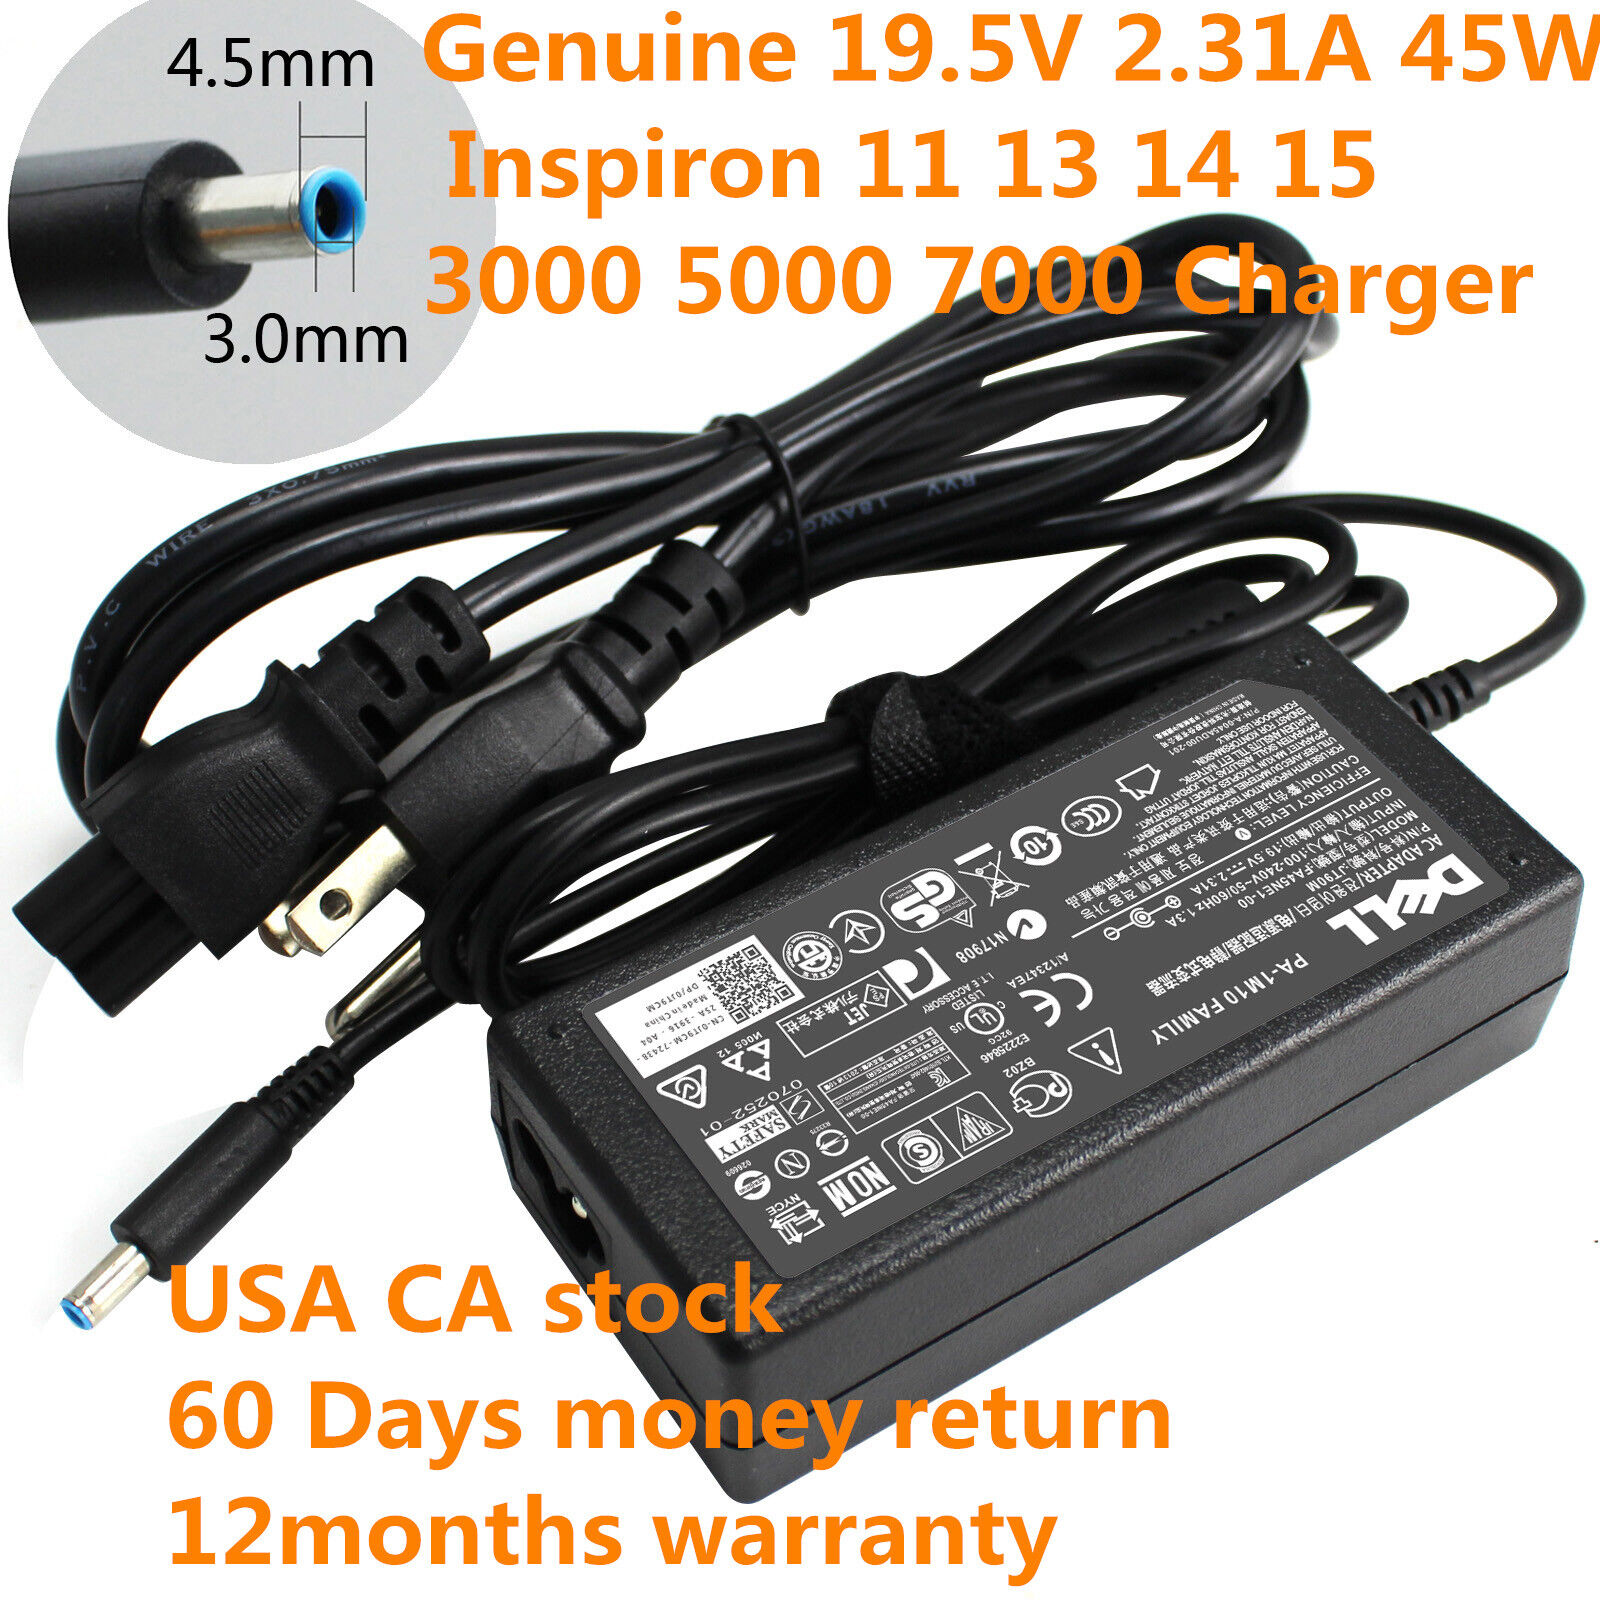 NEW Genuine 45W Charger Adapter forD ell Inspiron11 13 14 15 3000 5000 7000 